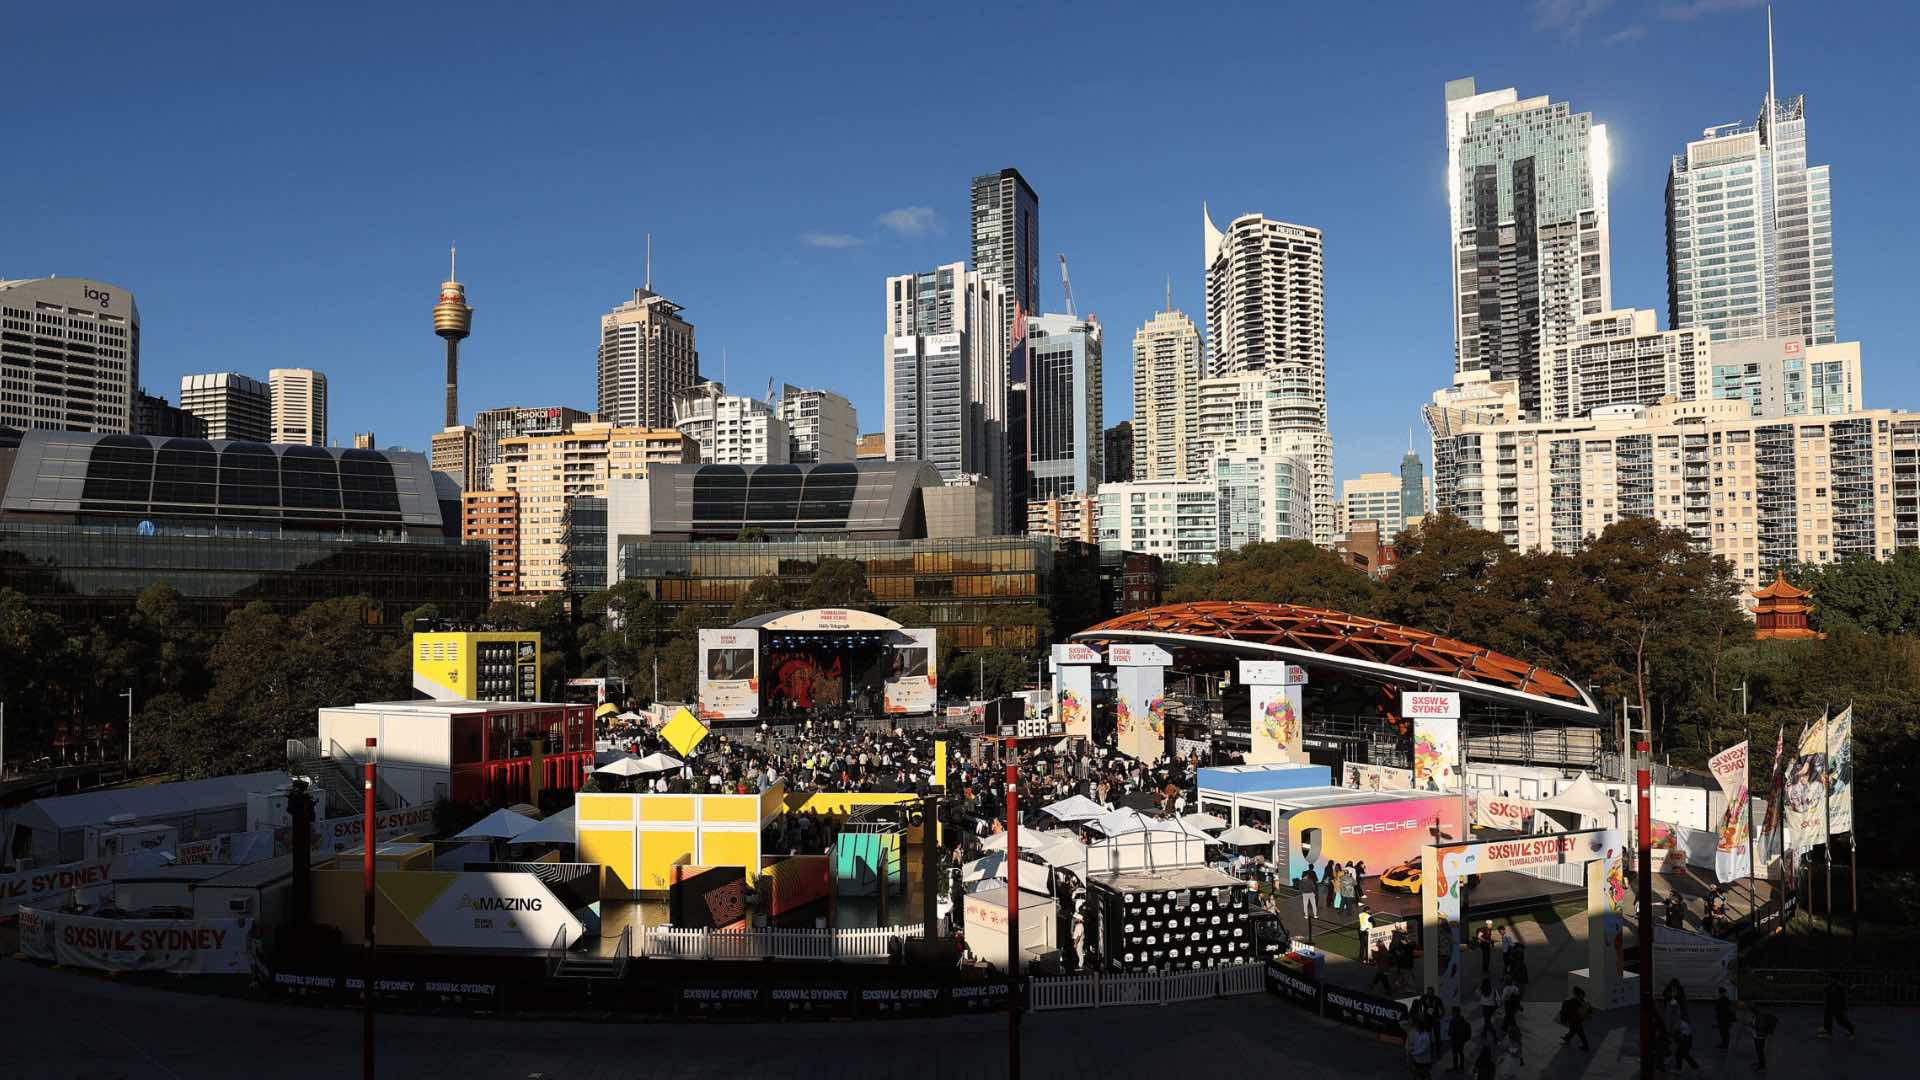 SXSW Sydney Wrap-Up: Insights and Inspiration from the Eye-Opening Festival